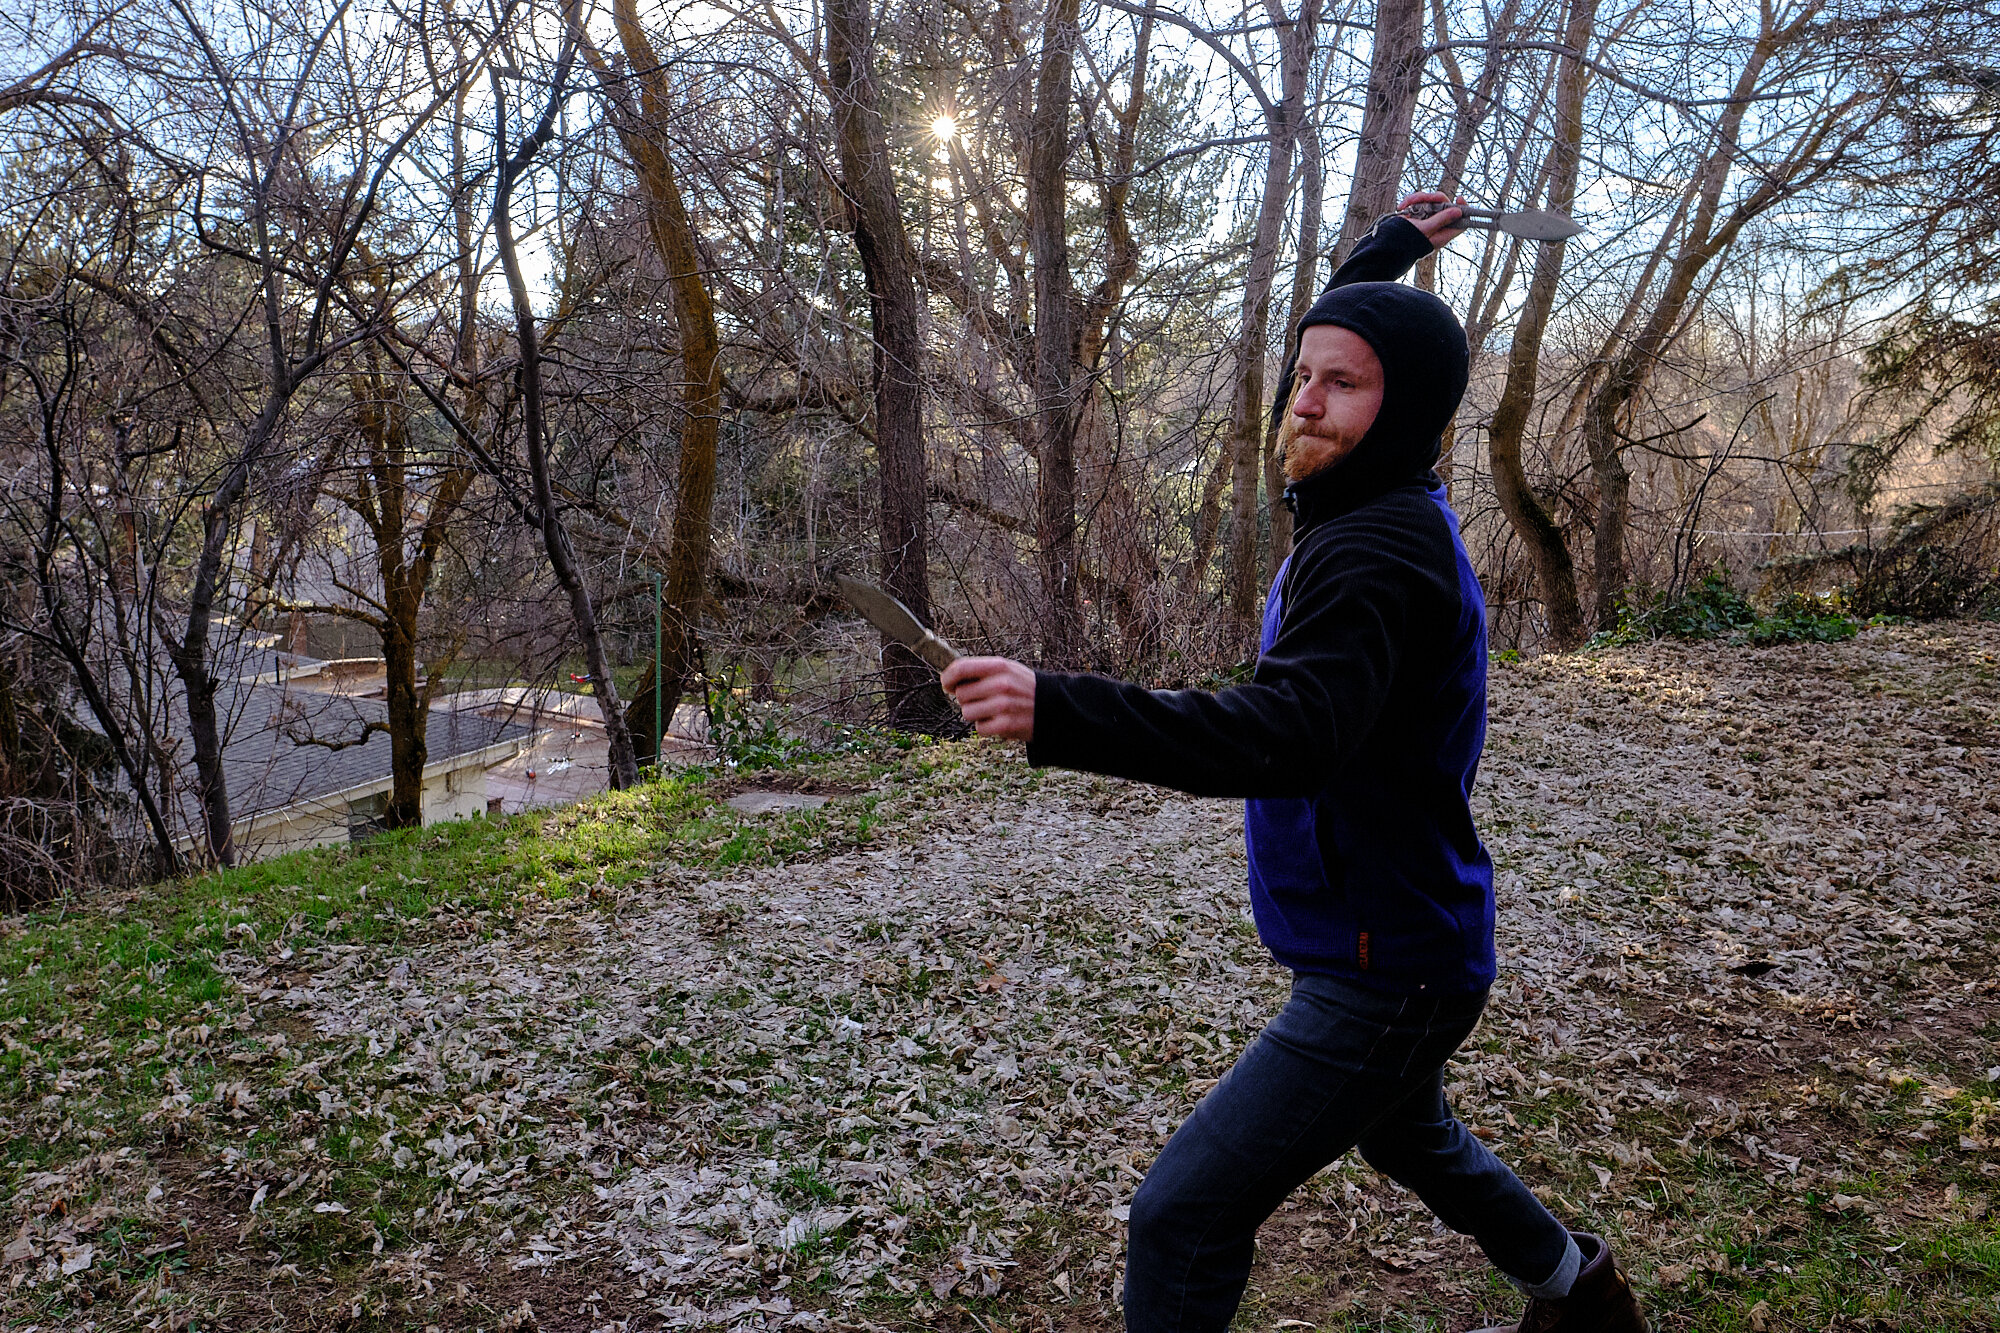  Lebowski tries his hand at throwing knives that were given to me by a Native American competitive knife thrower. | Holladay, UT 3/14/20 